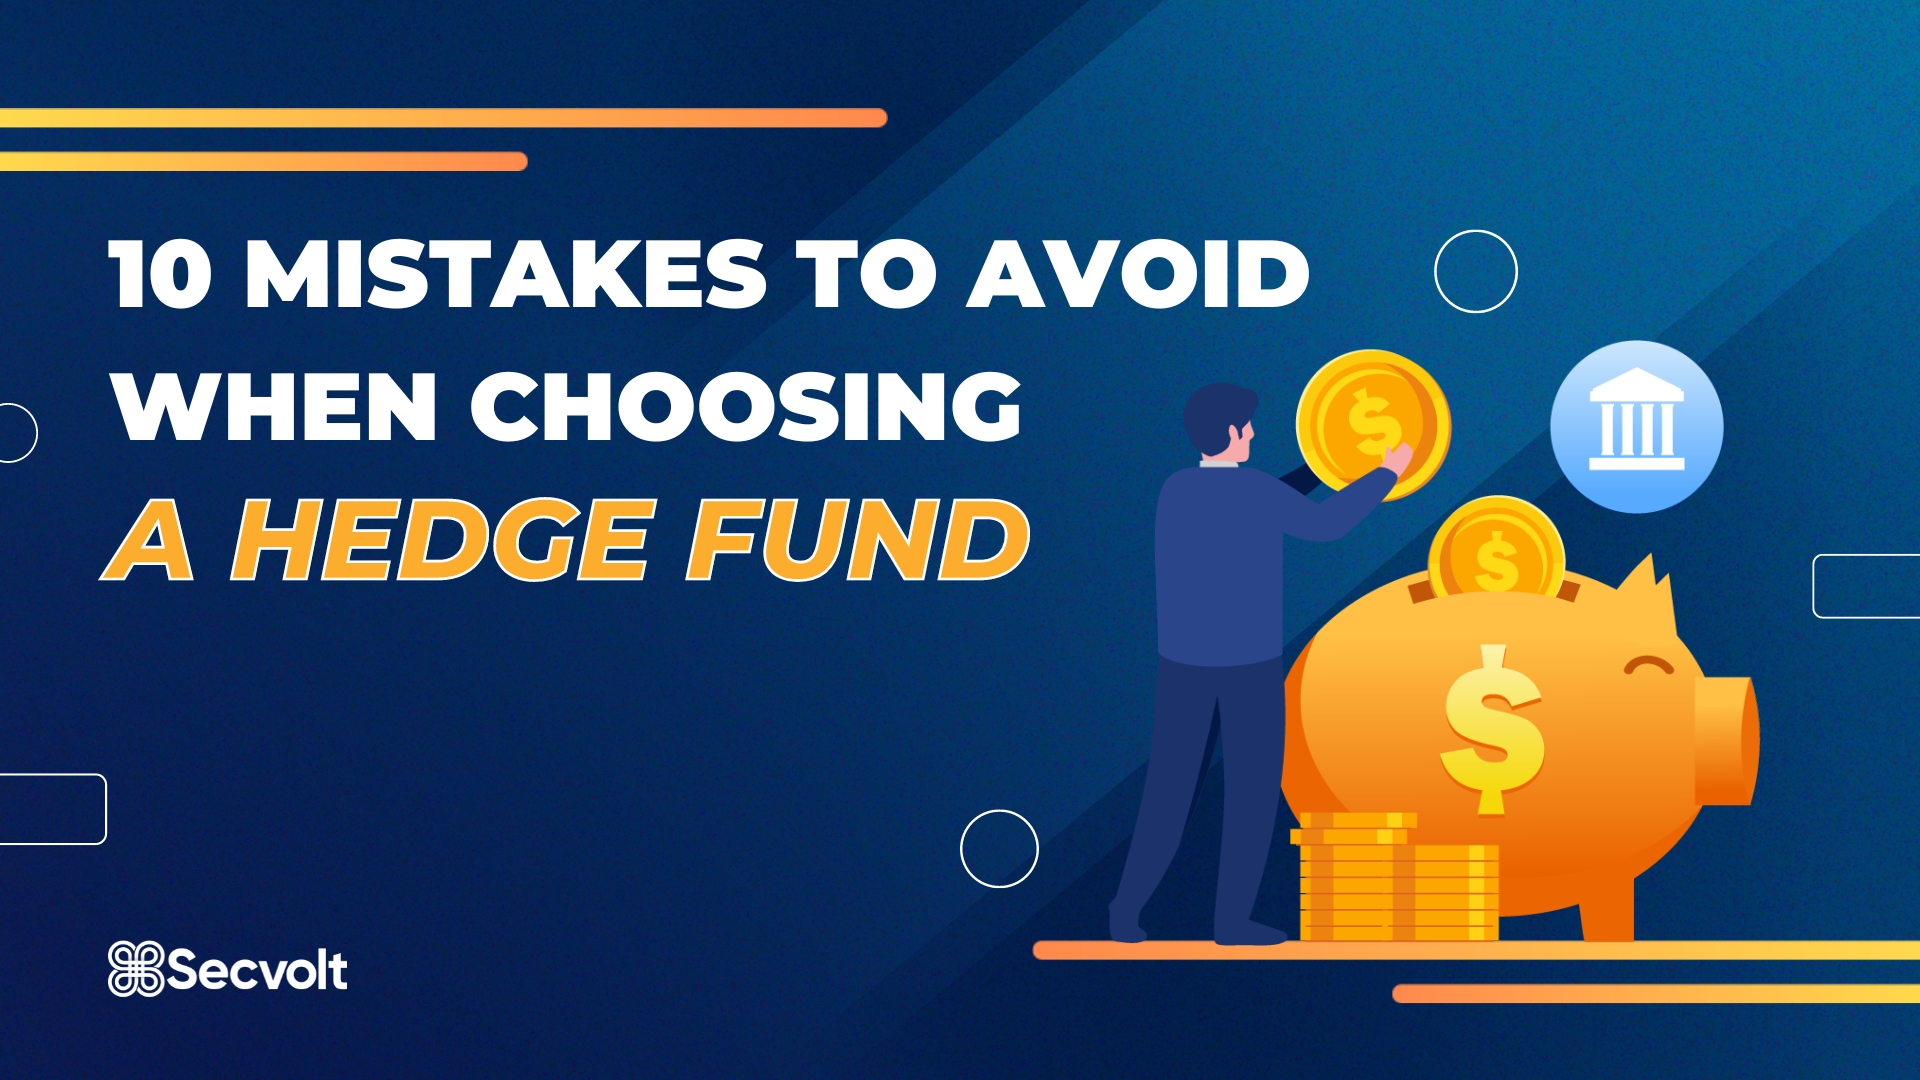 10 Mistakes To Avoid When Choosing A Hedge Fund